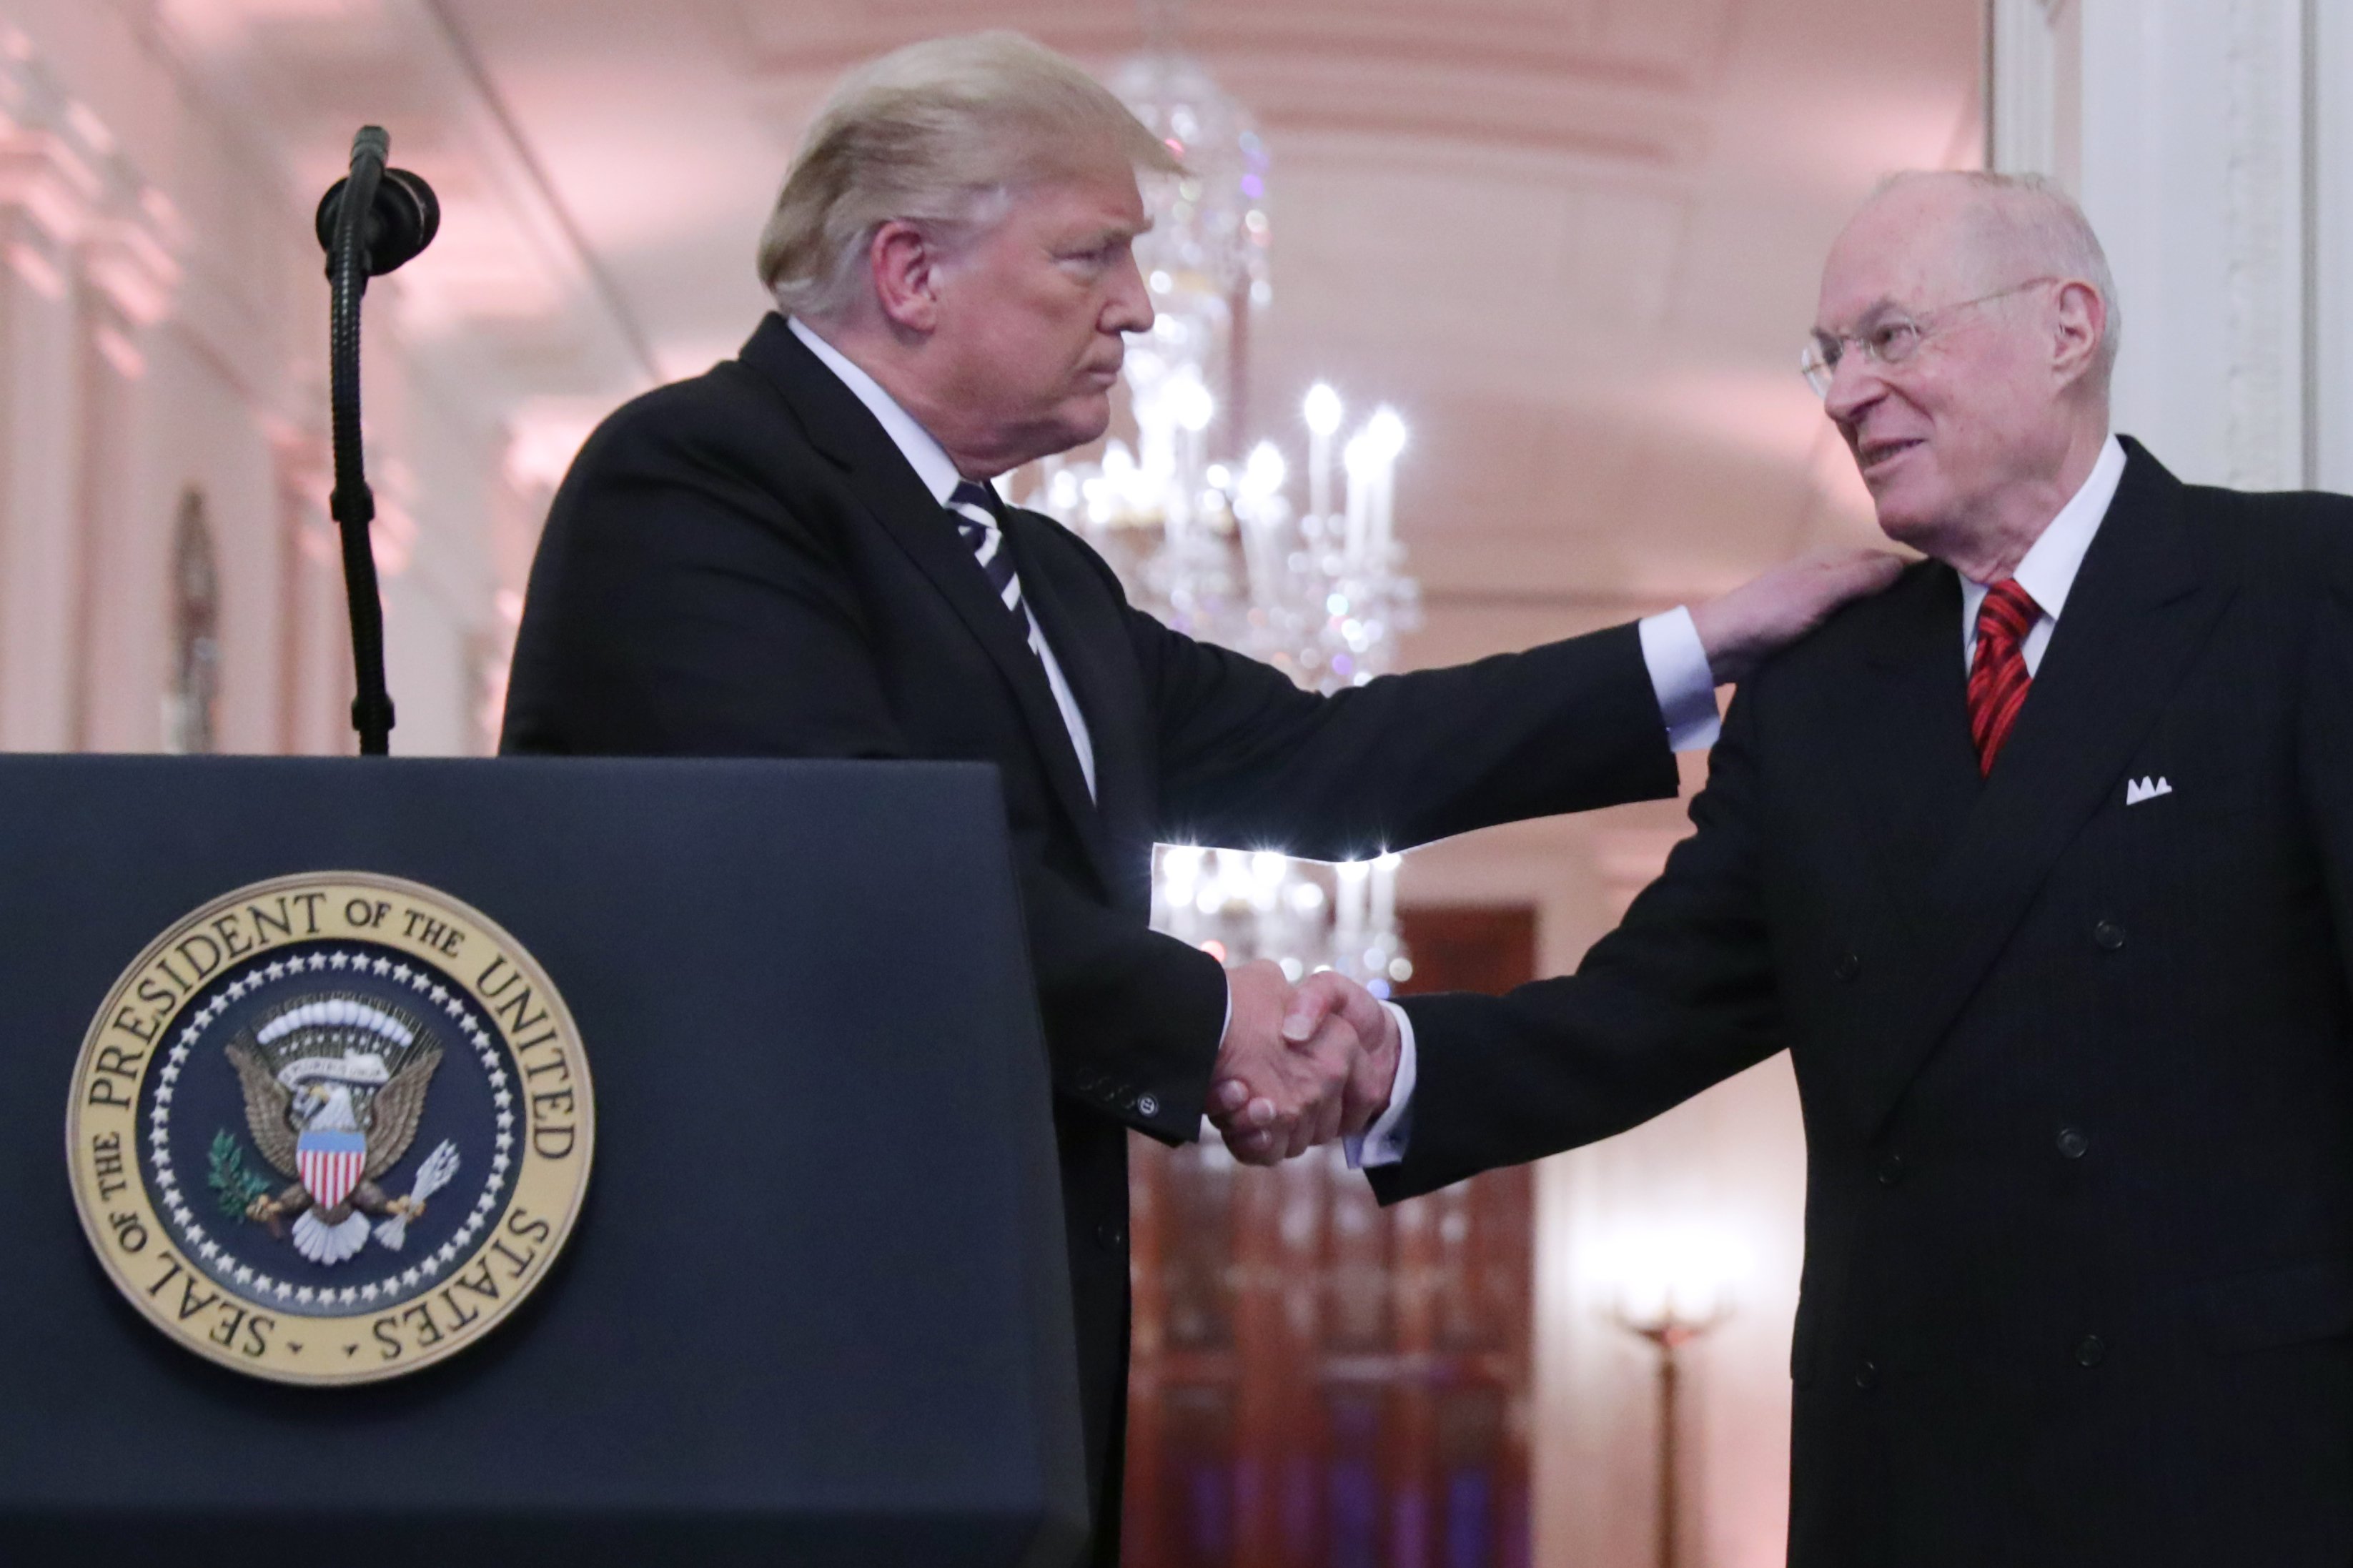 President Donald Trump shakes hands with retired Justice Anthony Kennedy during the ceremonial swearing in of Justice Brett Kavanaugh at the White House on October 8, 2018. (Chip Somodevilla/Getty Images)